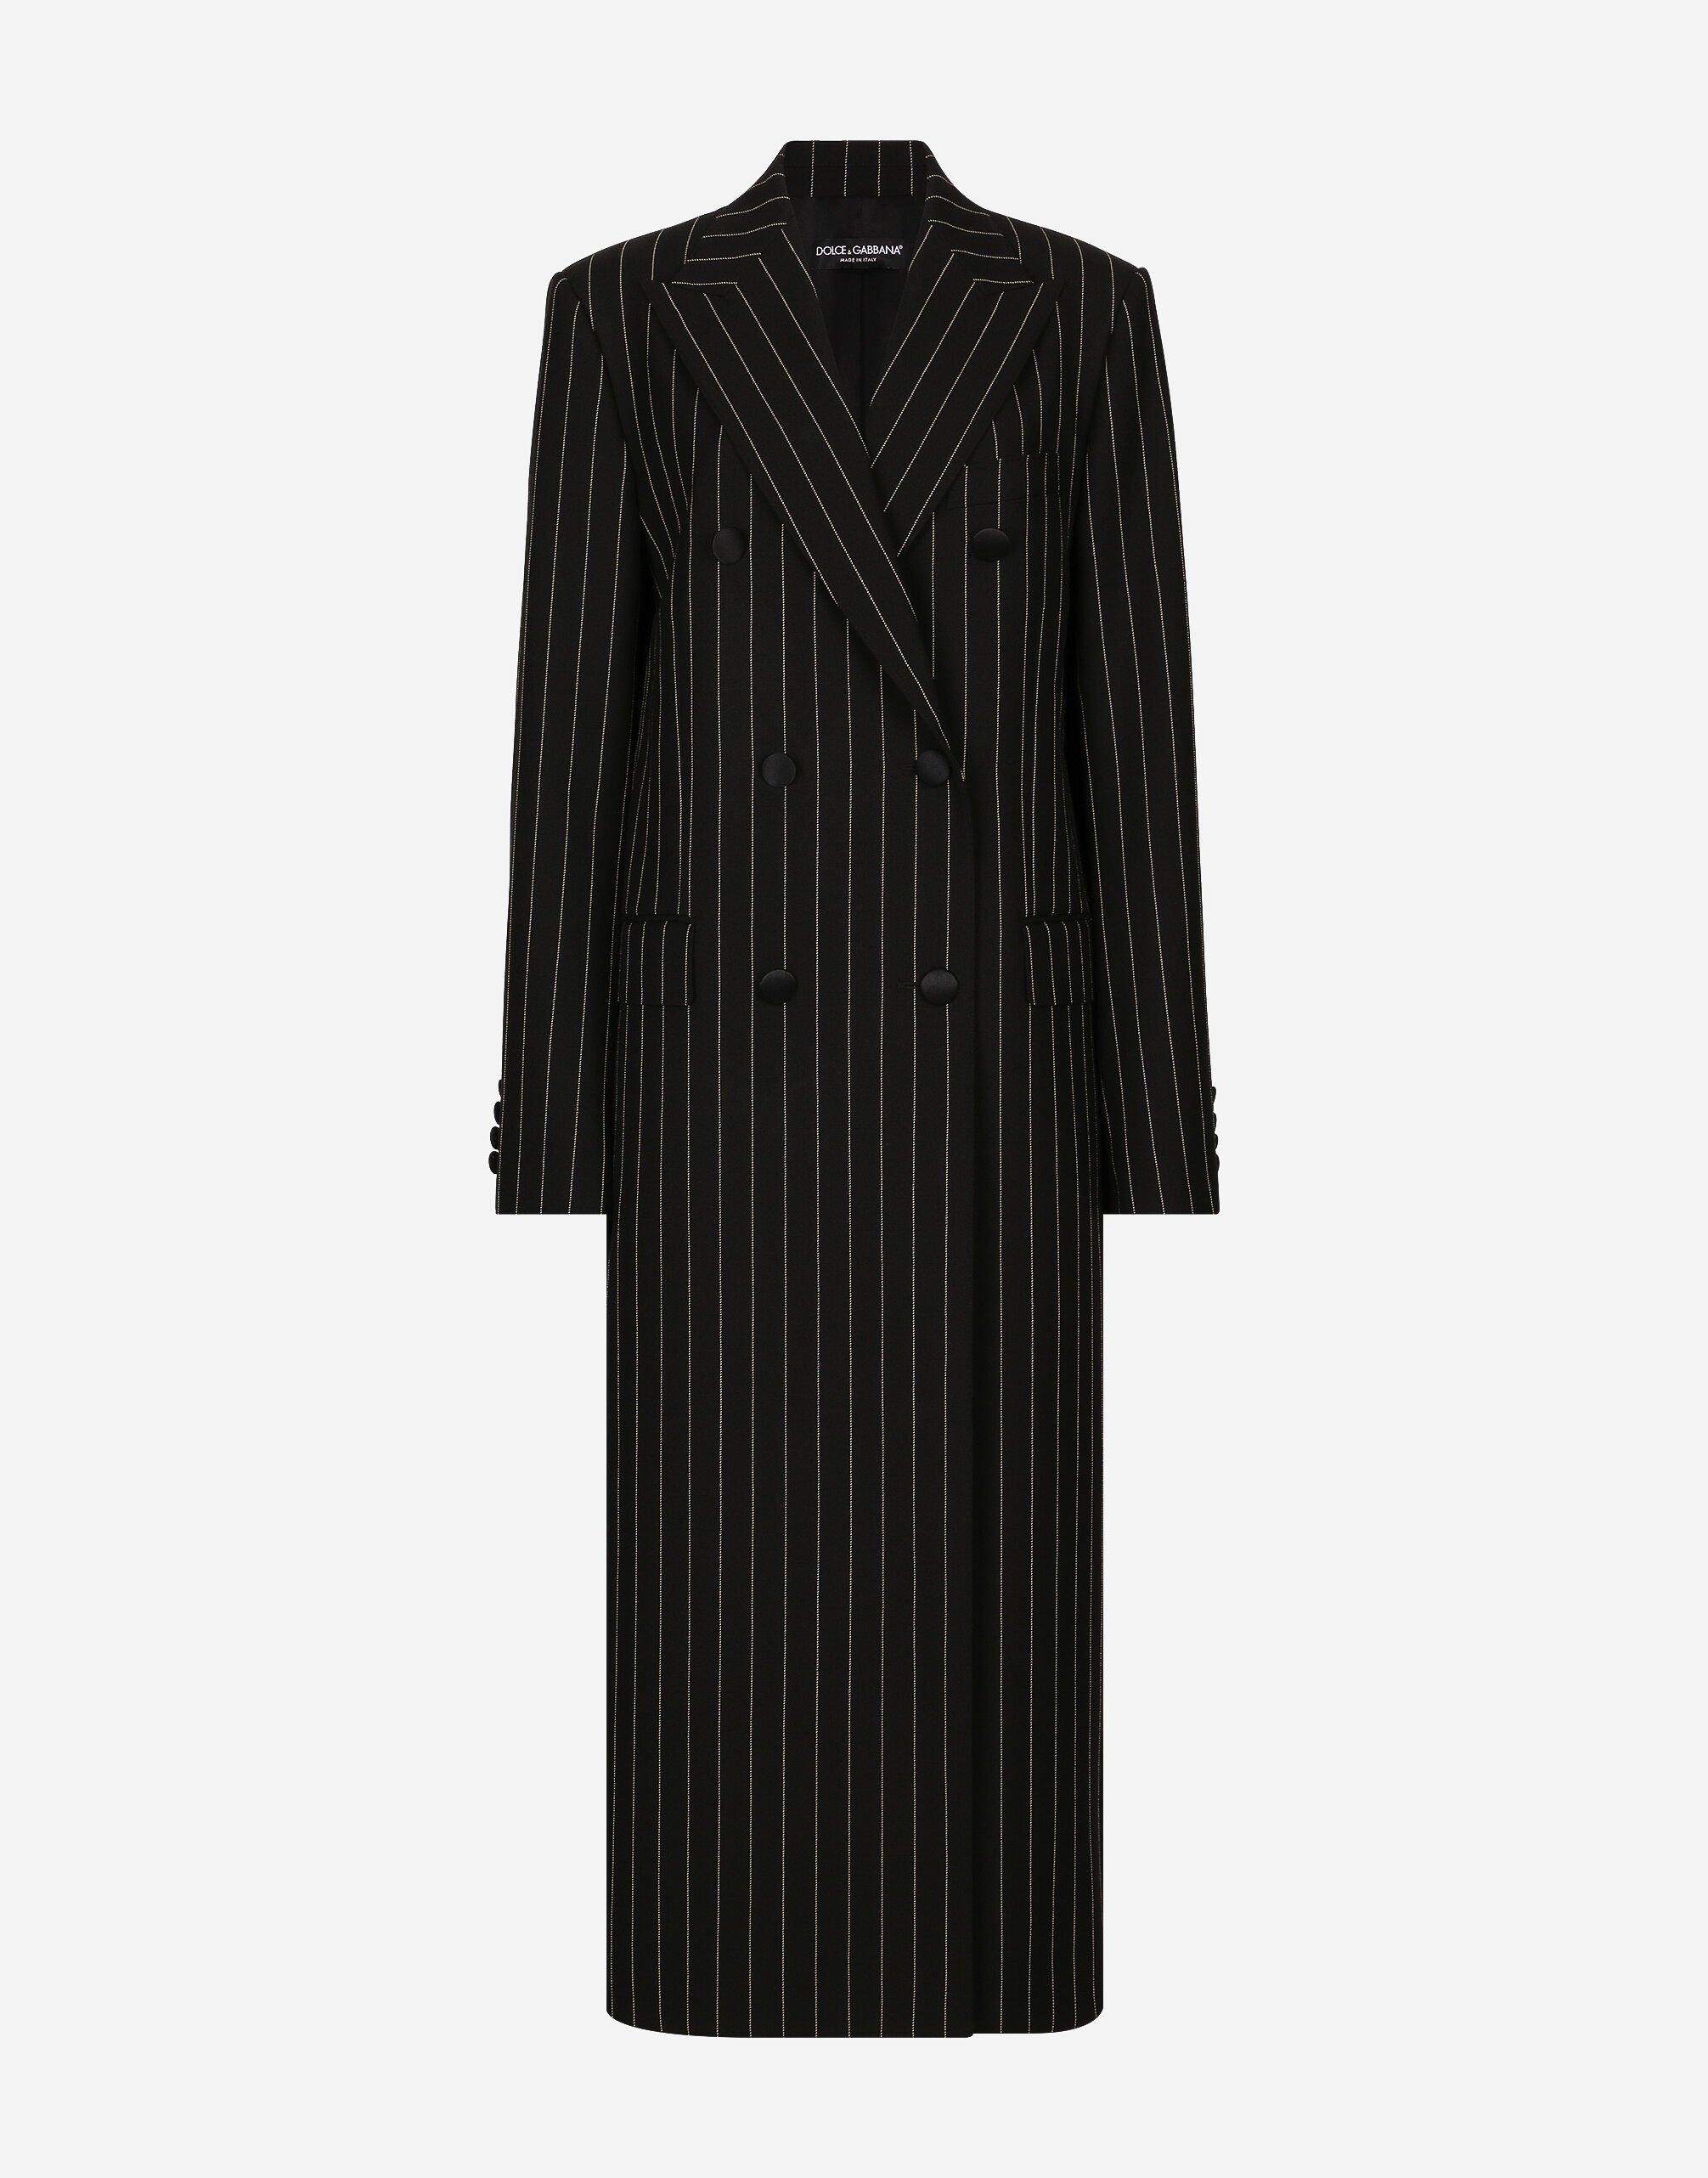 Dolce & Gabbana Pinstripe double-breasted coat in woolen fabric Print F0E1YTIS1VH